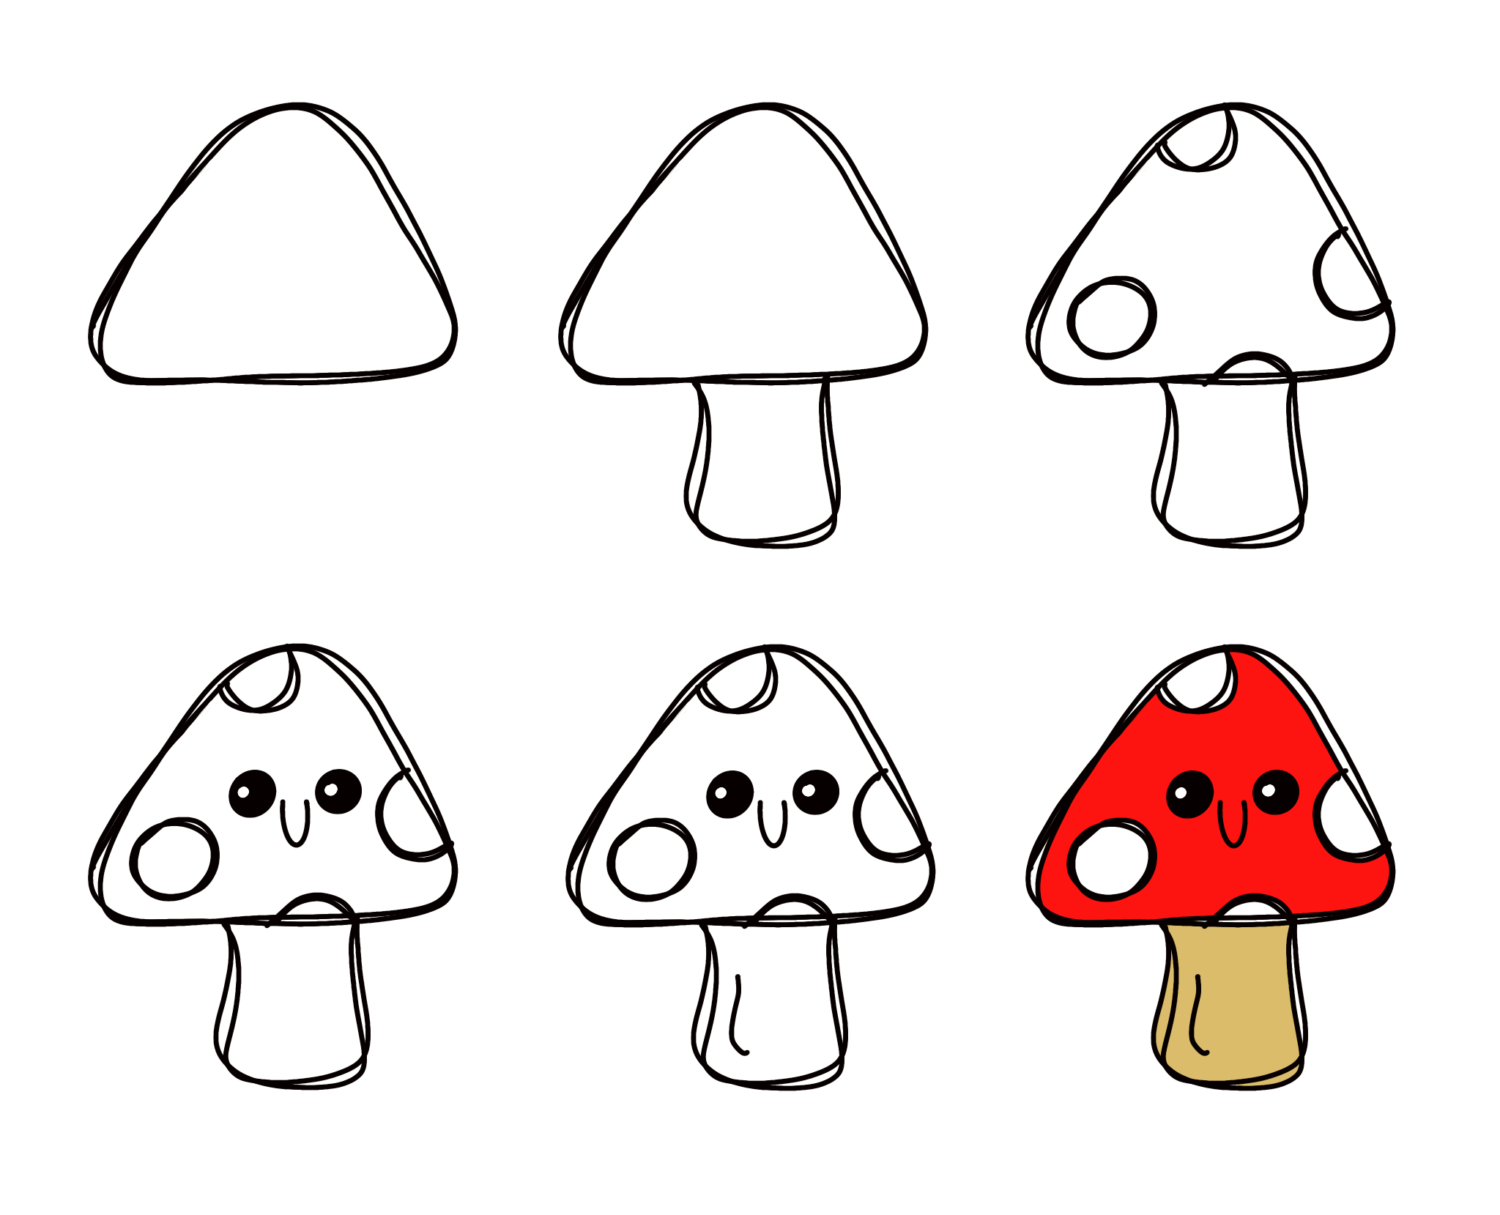 Image is a step by step tutorial for drawing a toadstool, as described in the written instructions.